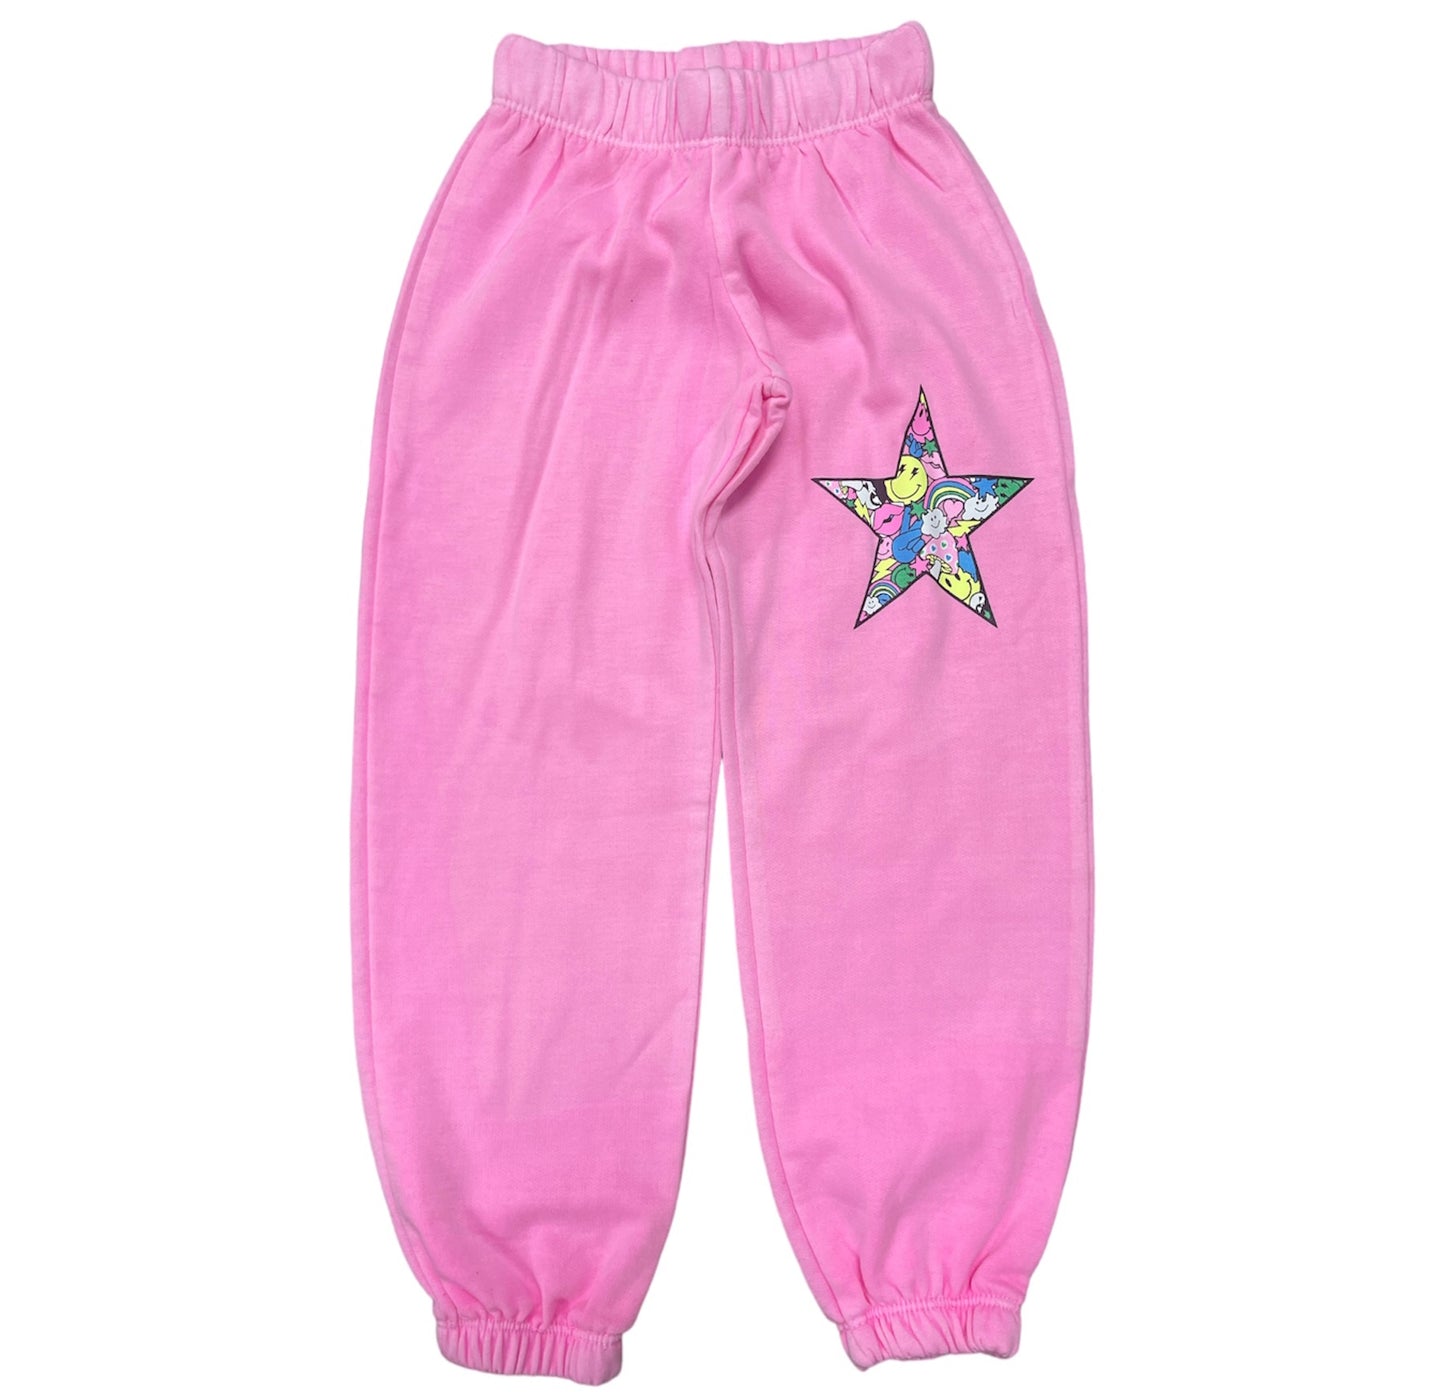 Neon Pink sweatpant with star